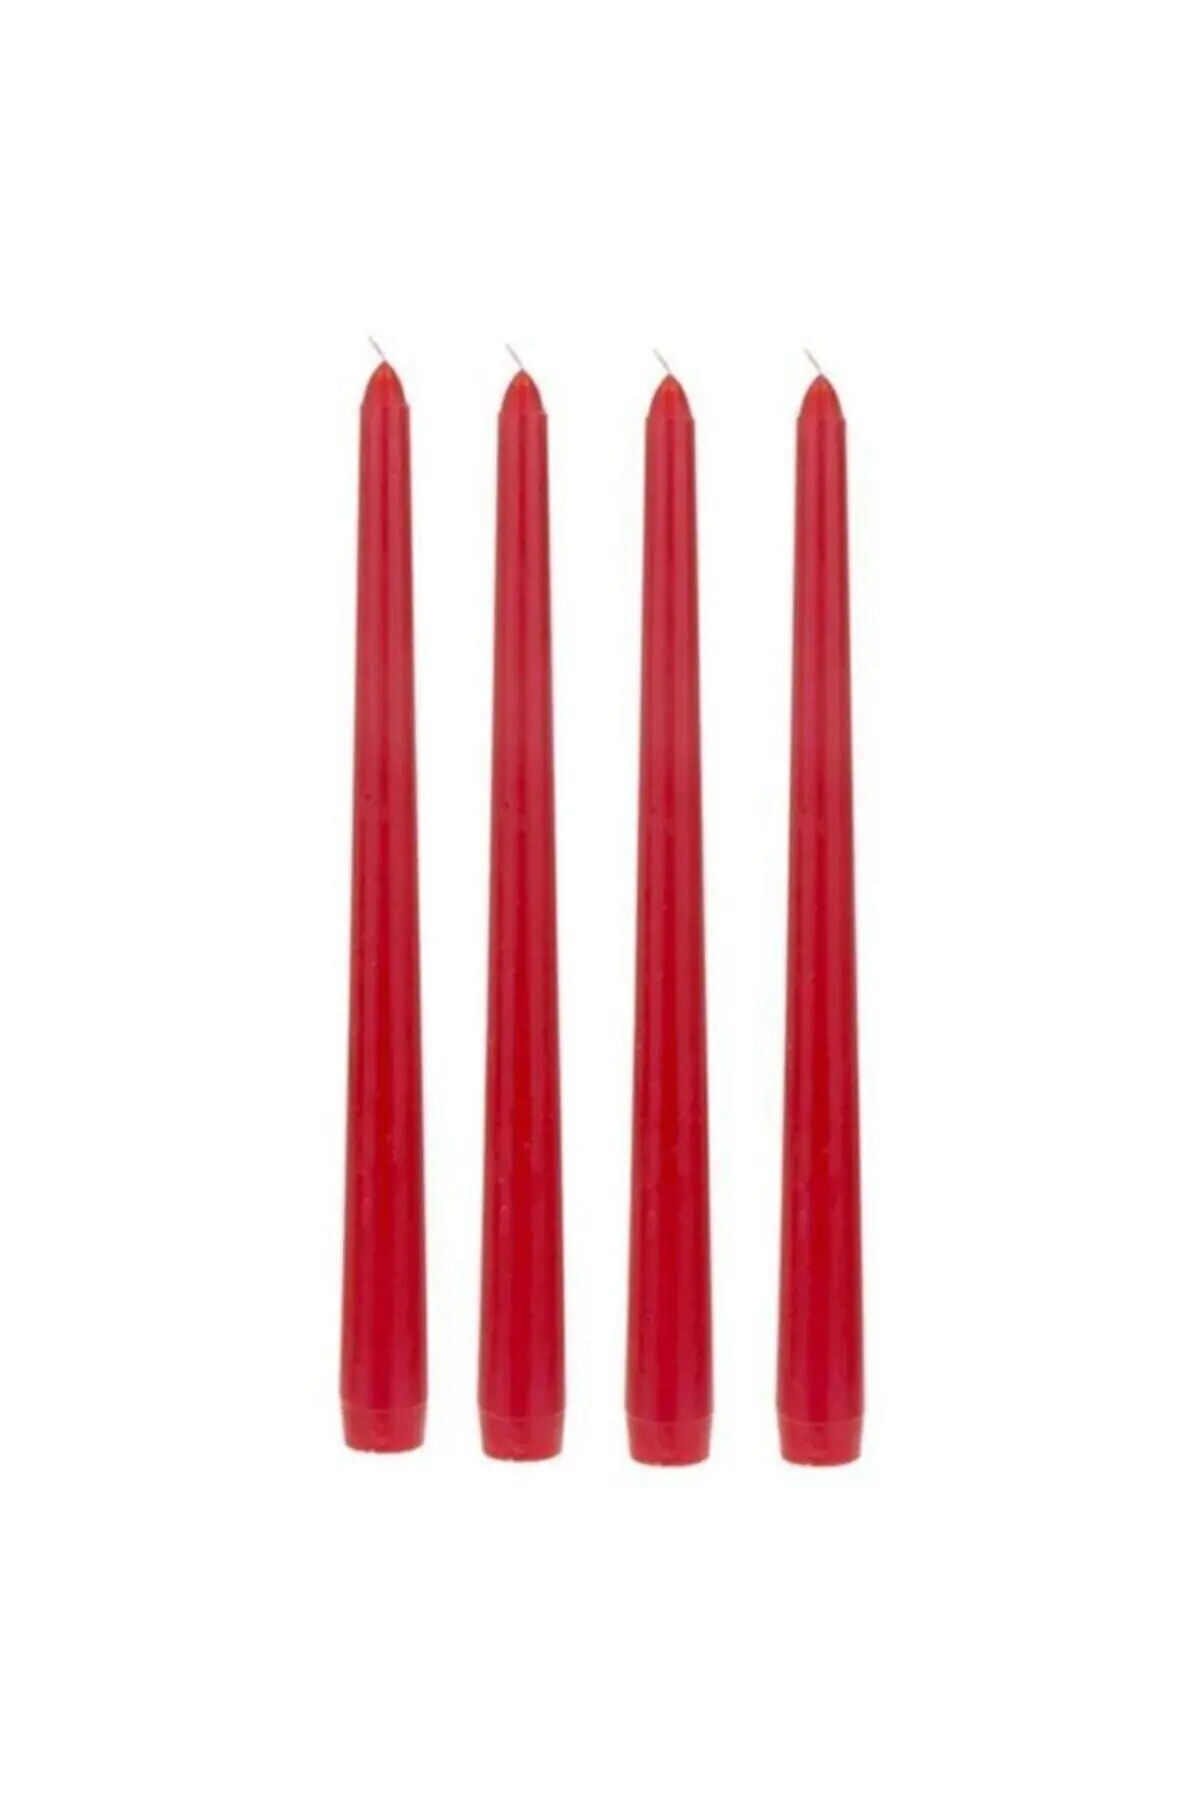 

4 pcs Red Taper Candlestick Candle Bridal Jewelry For Wedding Gift Candles Henna Night